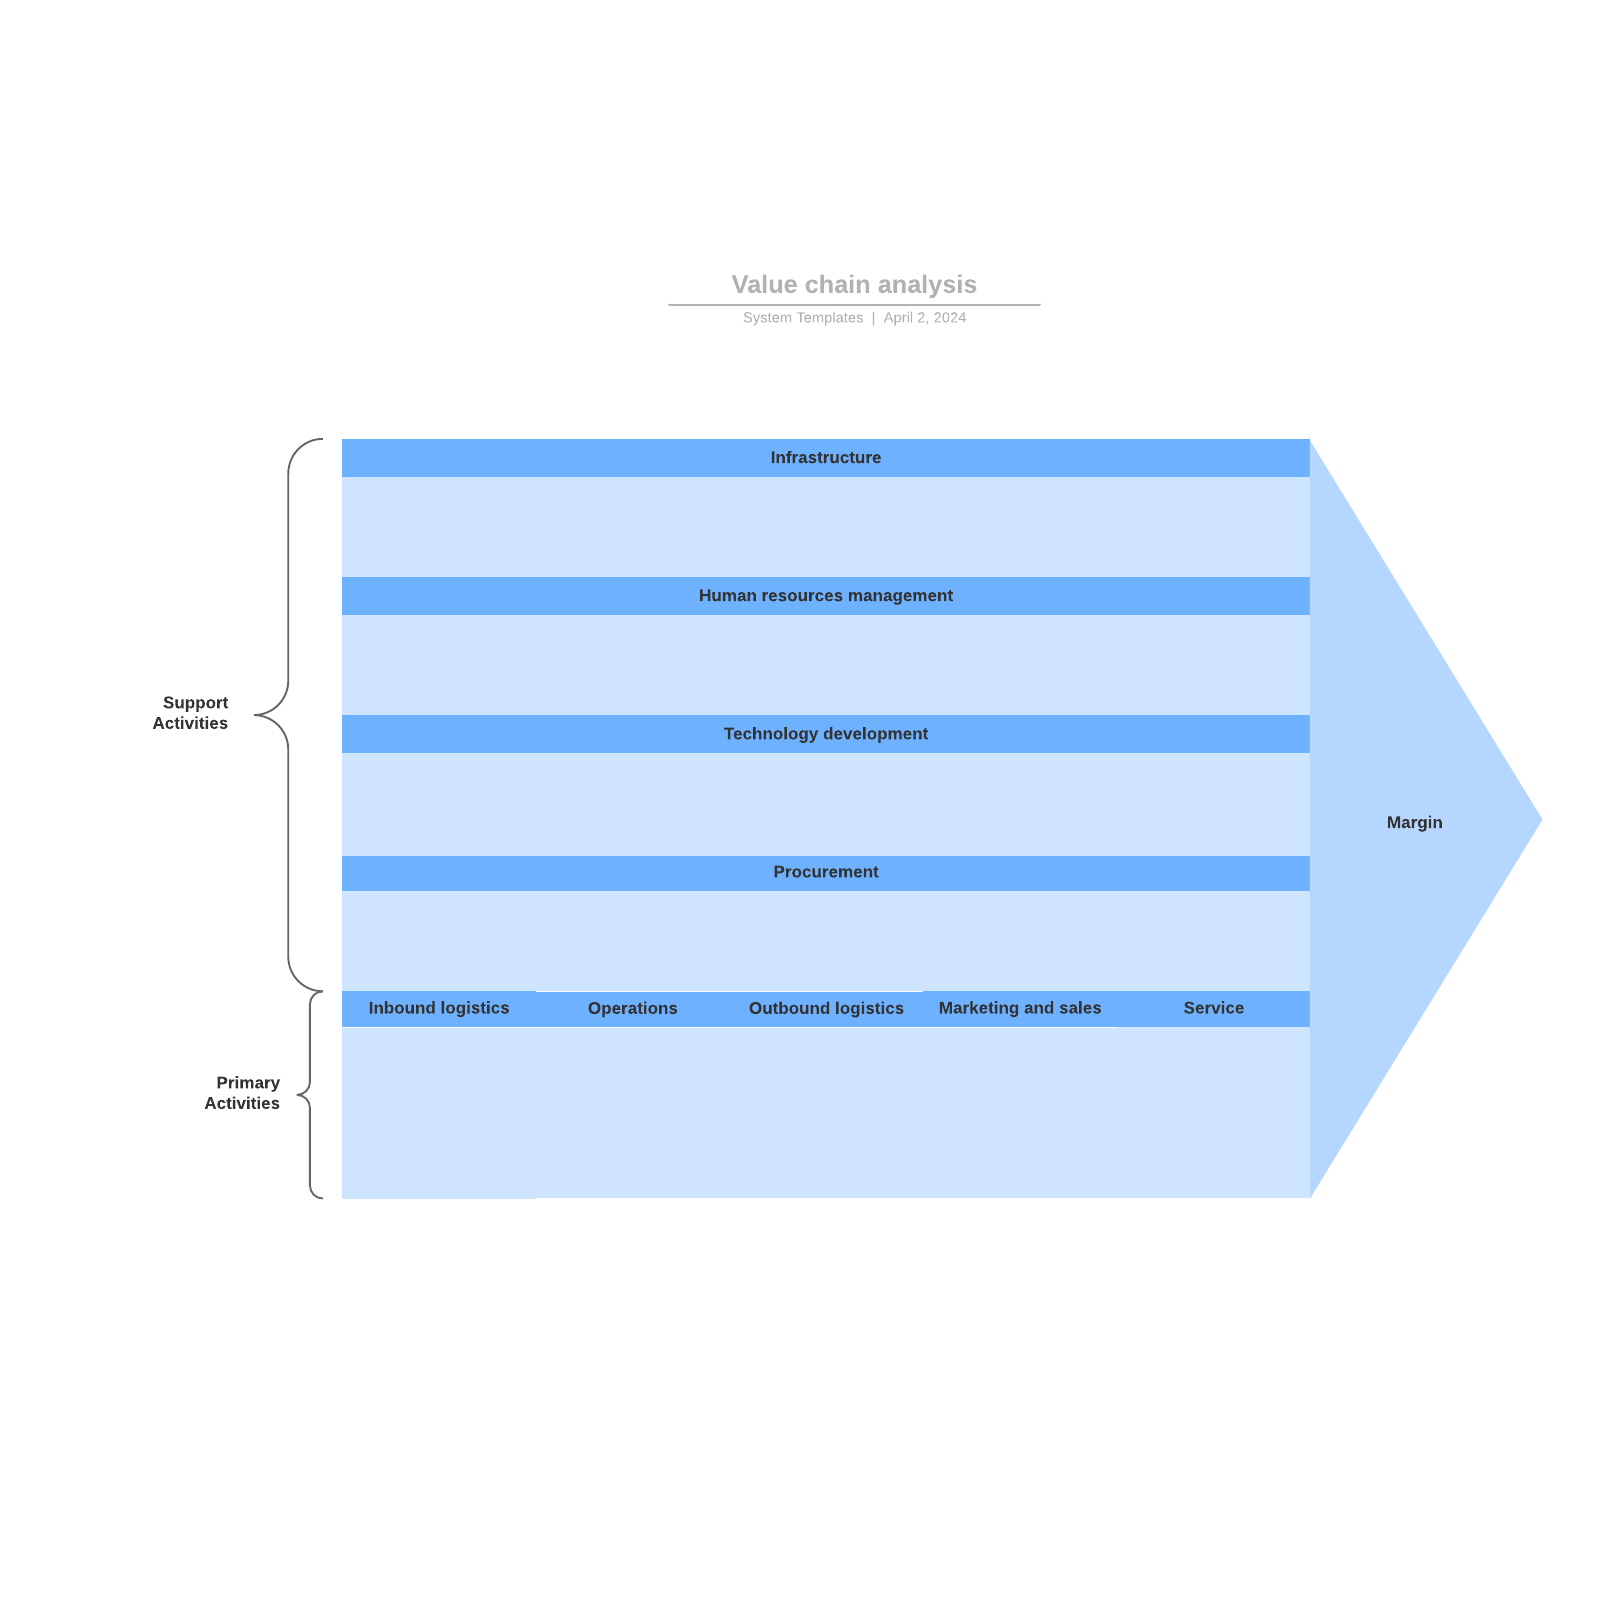 Value chain analysis example